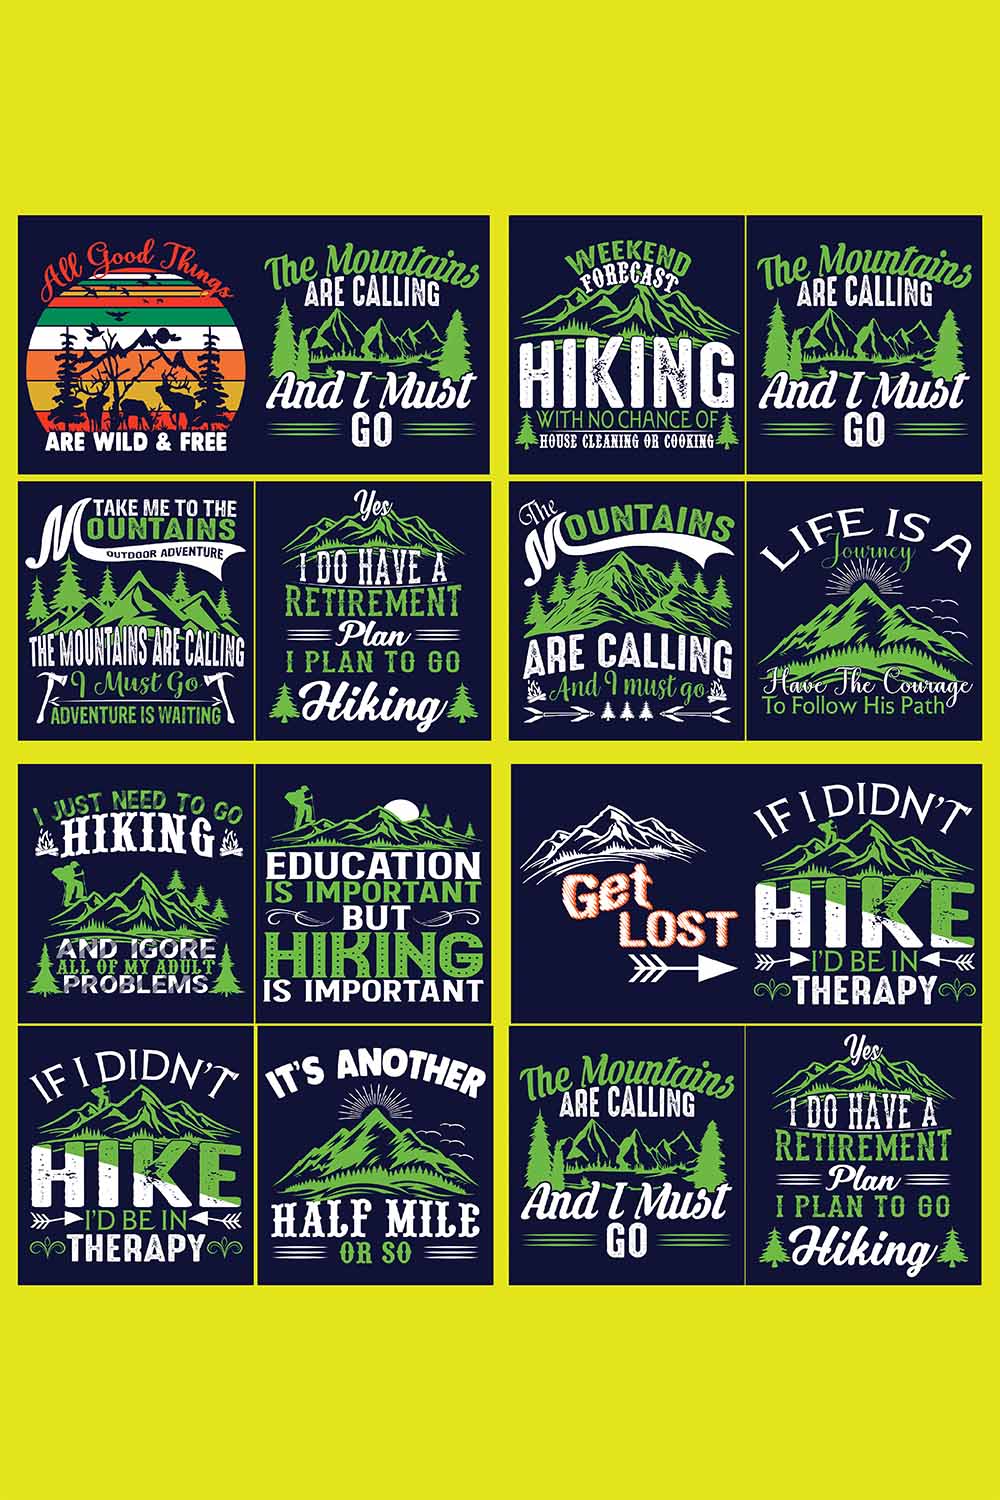 Hiking Saying & quotes, SVG T-Shirt Design |The Mountains are calling and I must go, Retro It's All About Jesus Typography Tshirt Design | Ai, Svg, Eps, Dxf, Jpeg, Png, Instant download T-Shirt | 100% print-ready Digital vector file pinterest preview image.